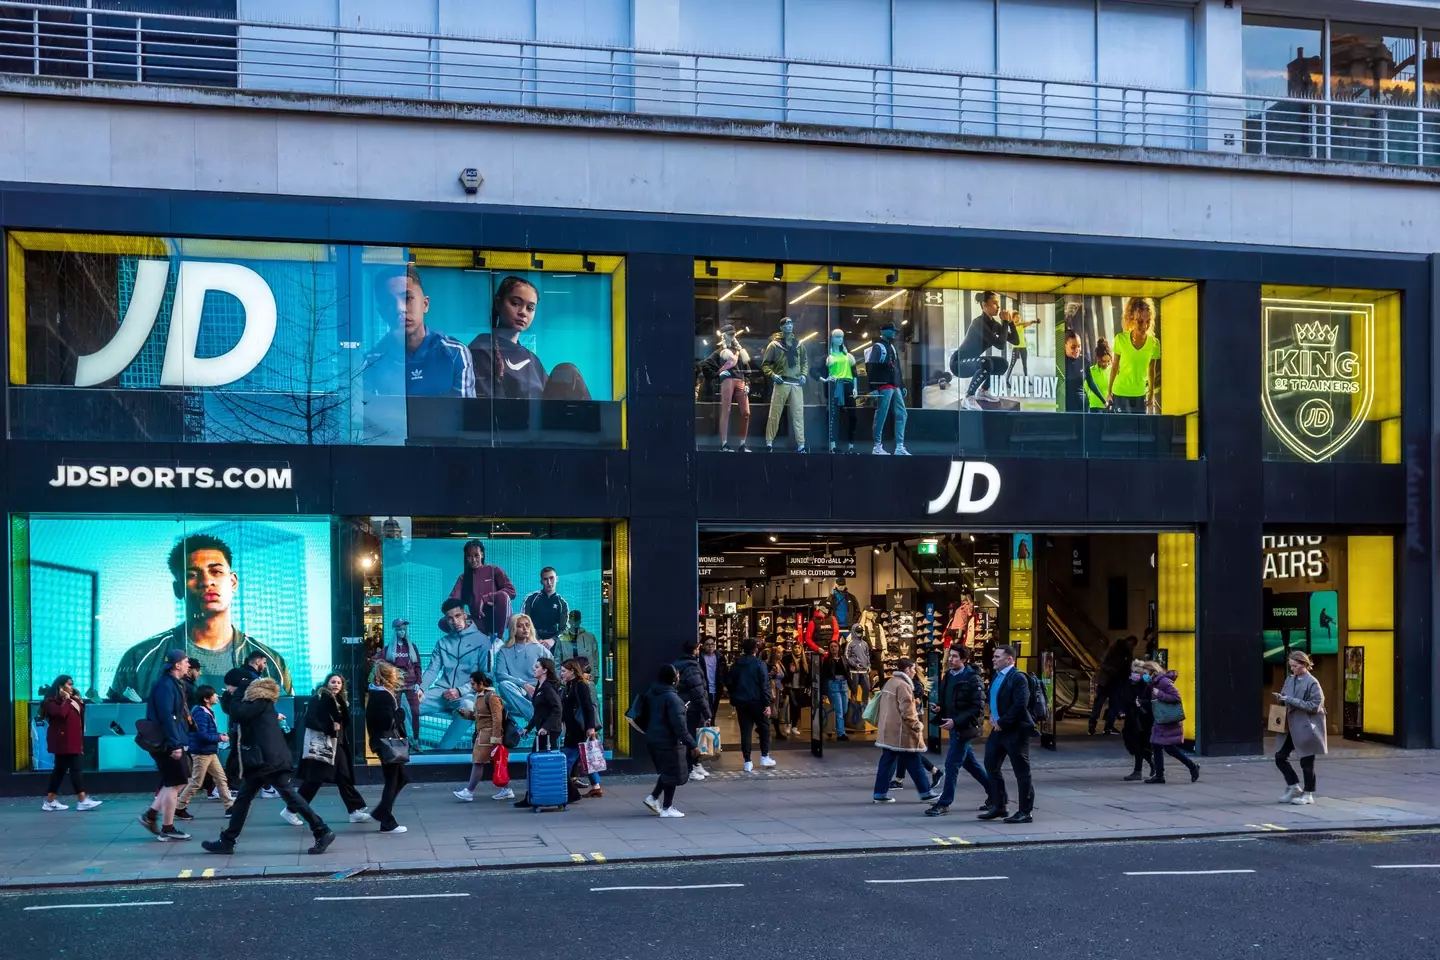 A former JD Sport employee said she often had to deal with theft and scams.